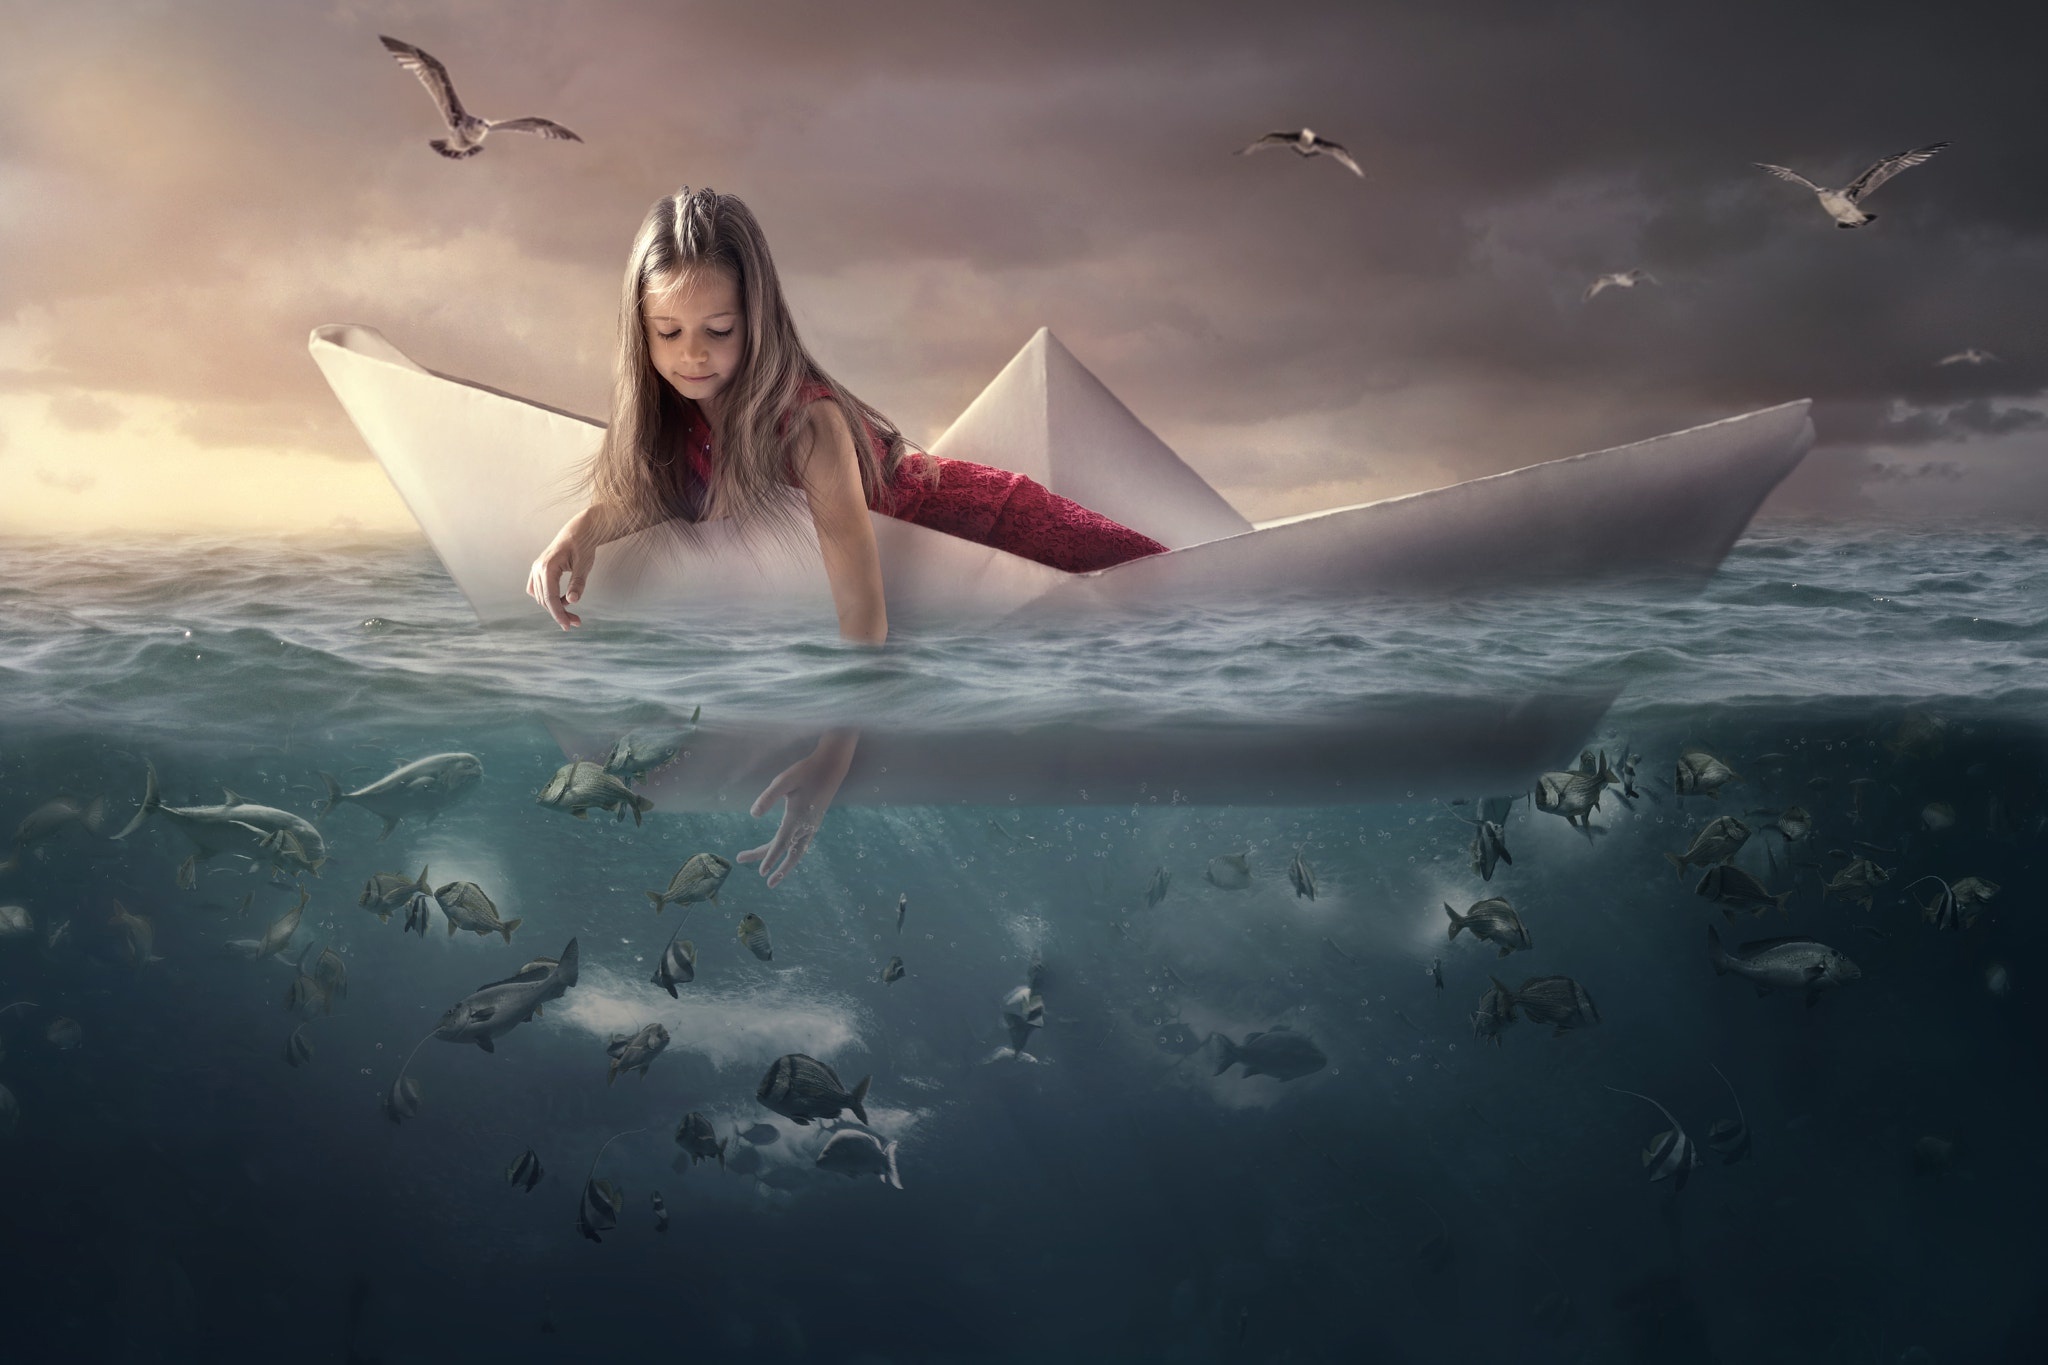 photography, manipulation, fish, ocean, paper boat, seagull, underwater